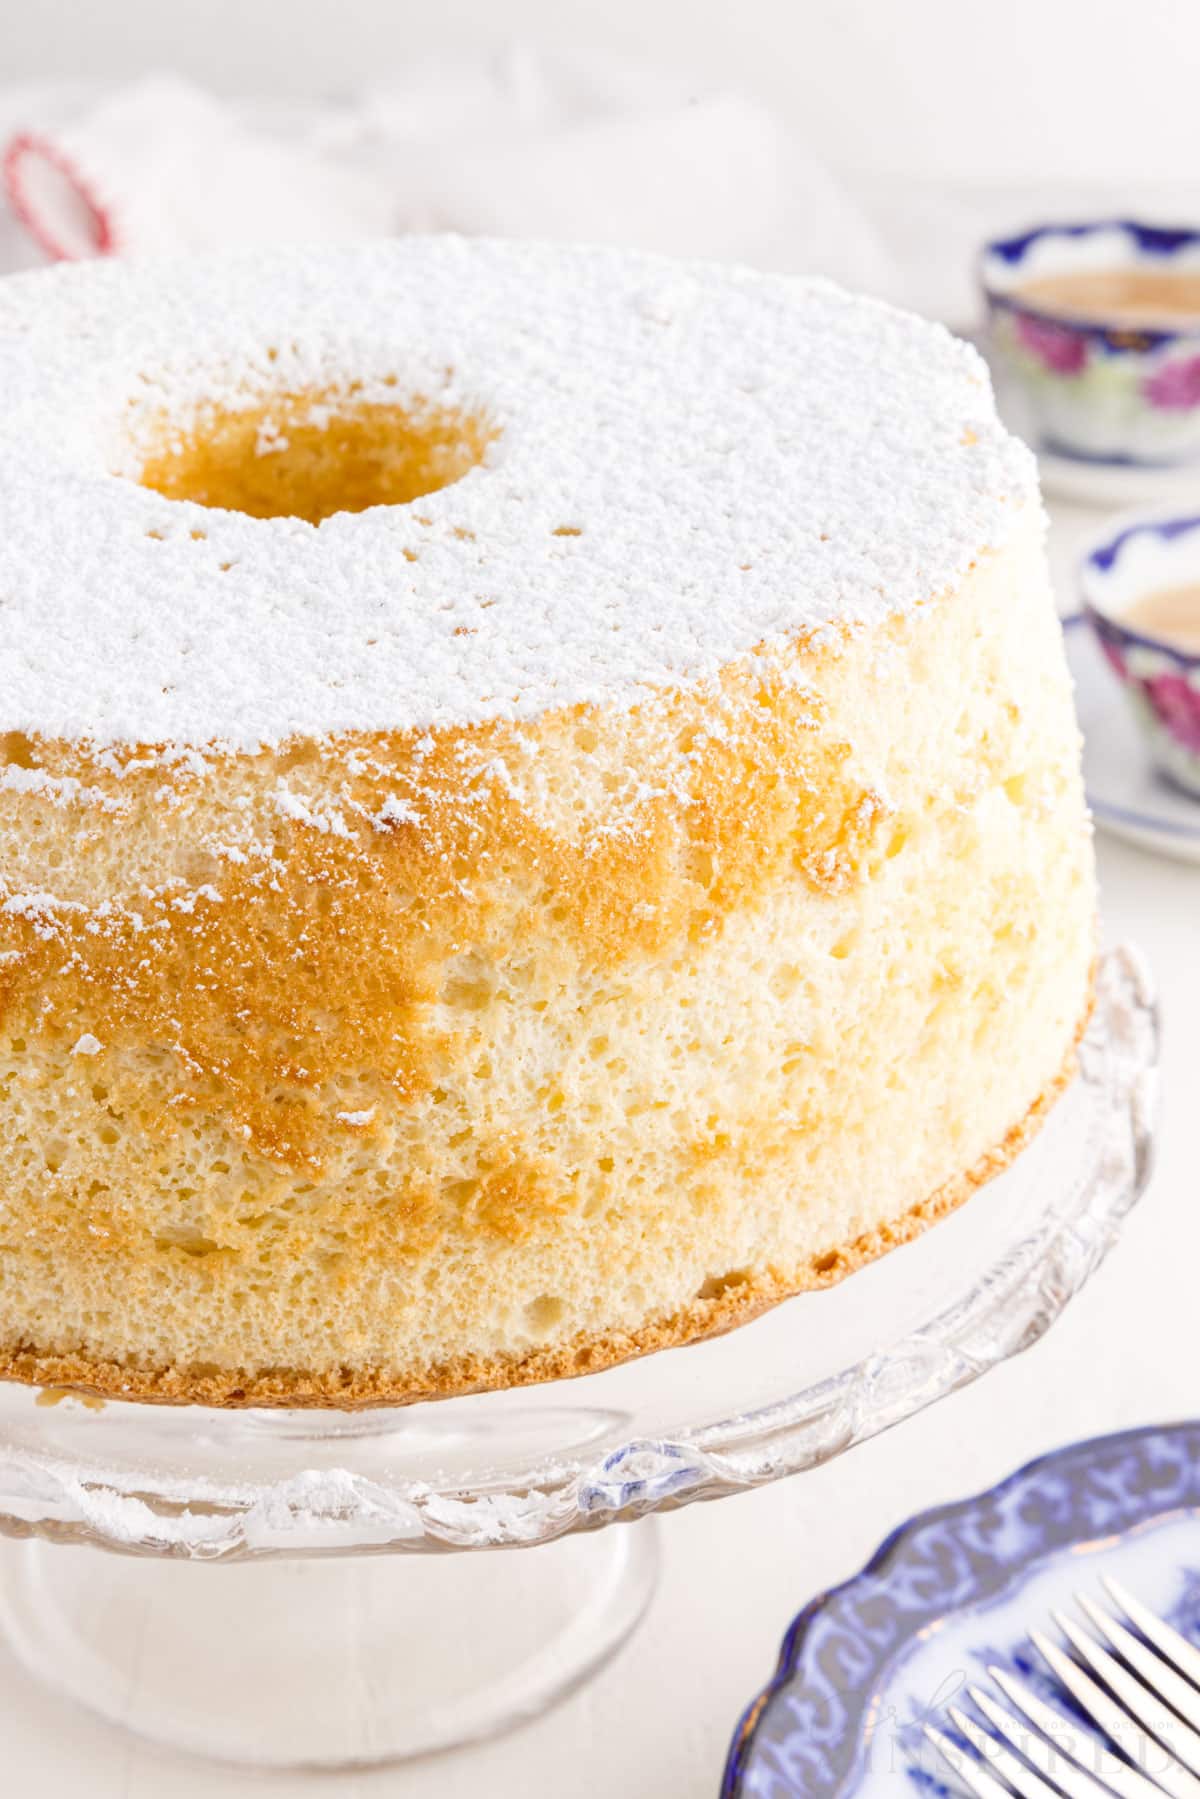 Front view of Vanilla Chiffon Cake on a cake stand.